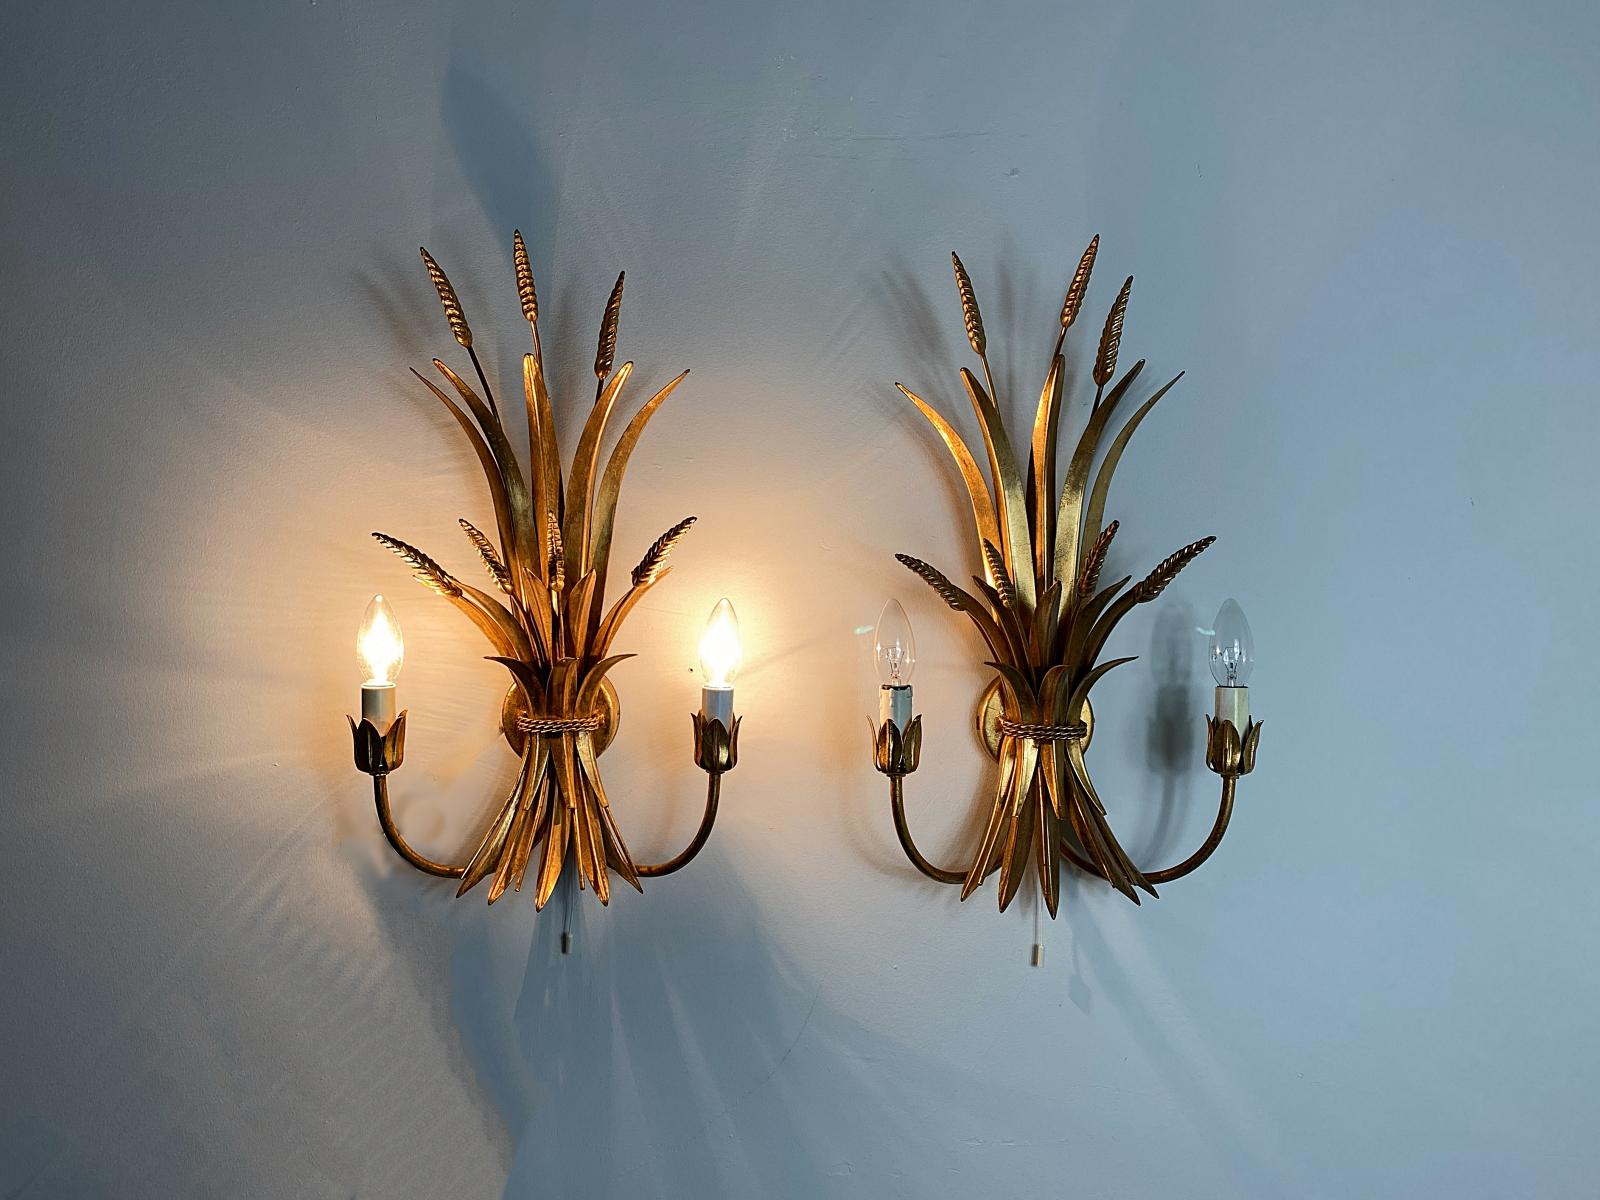 HANS KÖGL Pair Gilded Wheat Hollywood Regency Sconce Wall Lights, 1970s, Germany For Sale 2